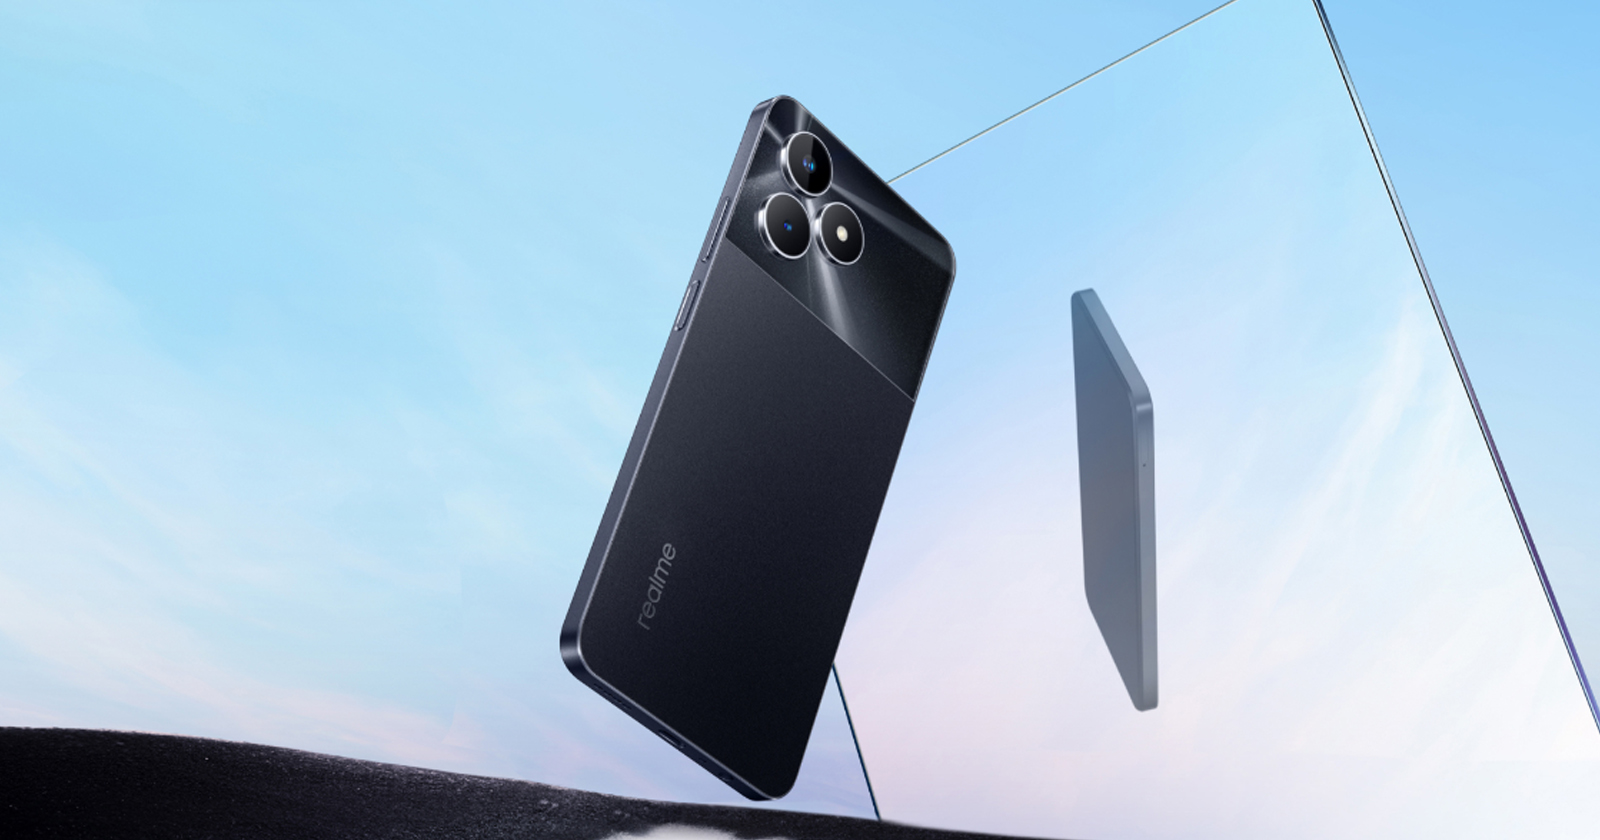 budget-friendly-realme-note-60-spotted-on-geekbench-here-are-the-features